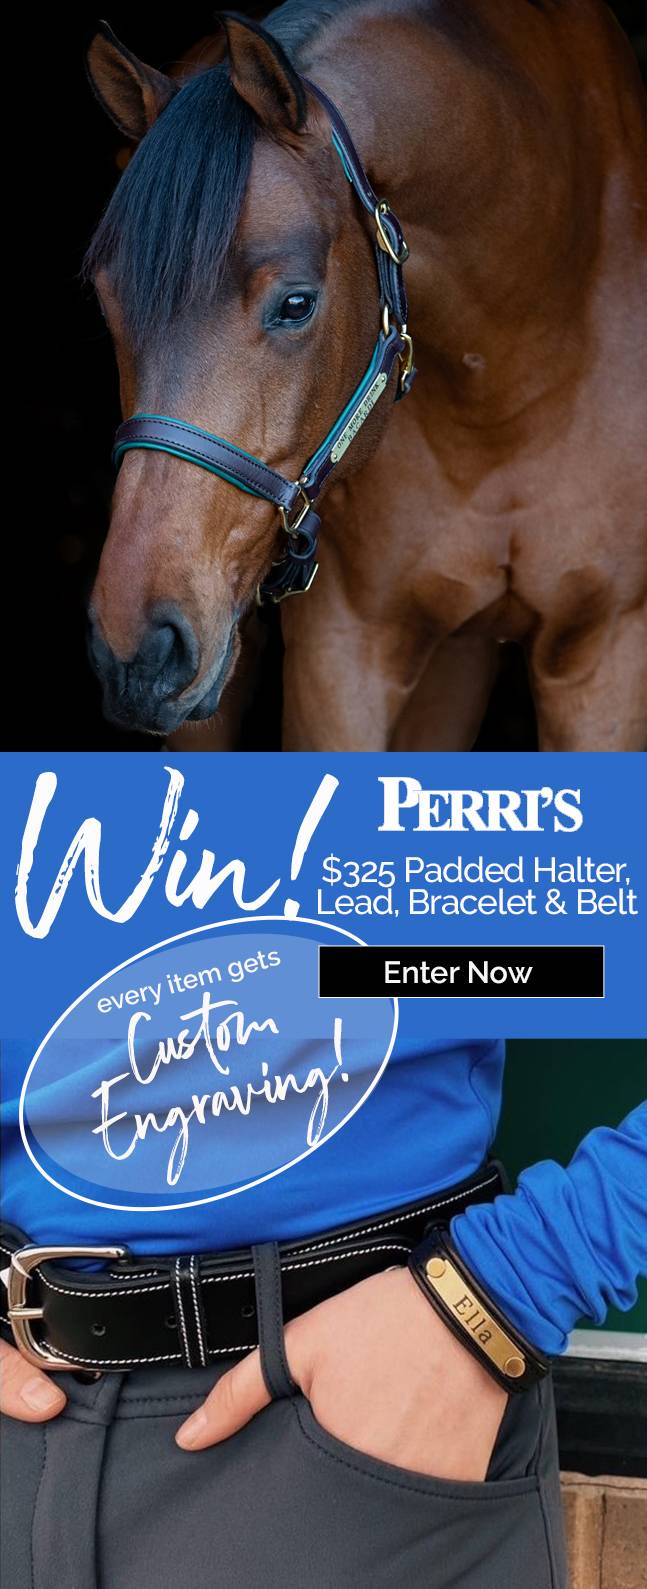 Perri's Leather Sweepstakes Valued at $385